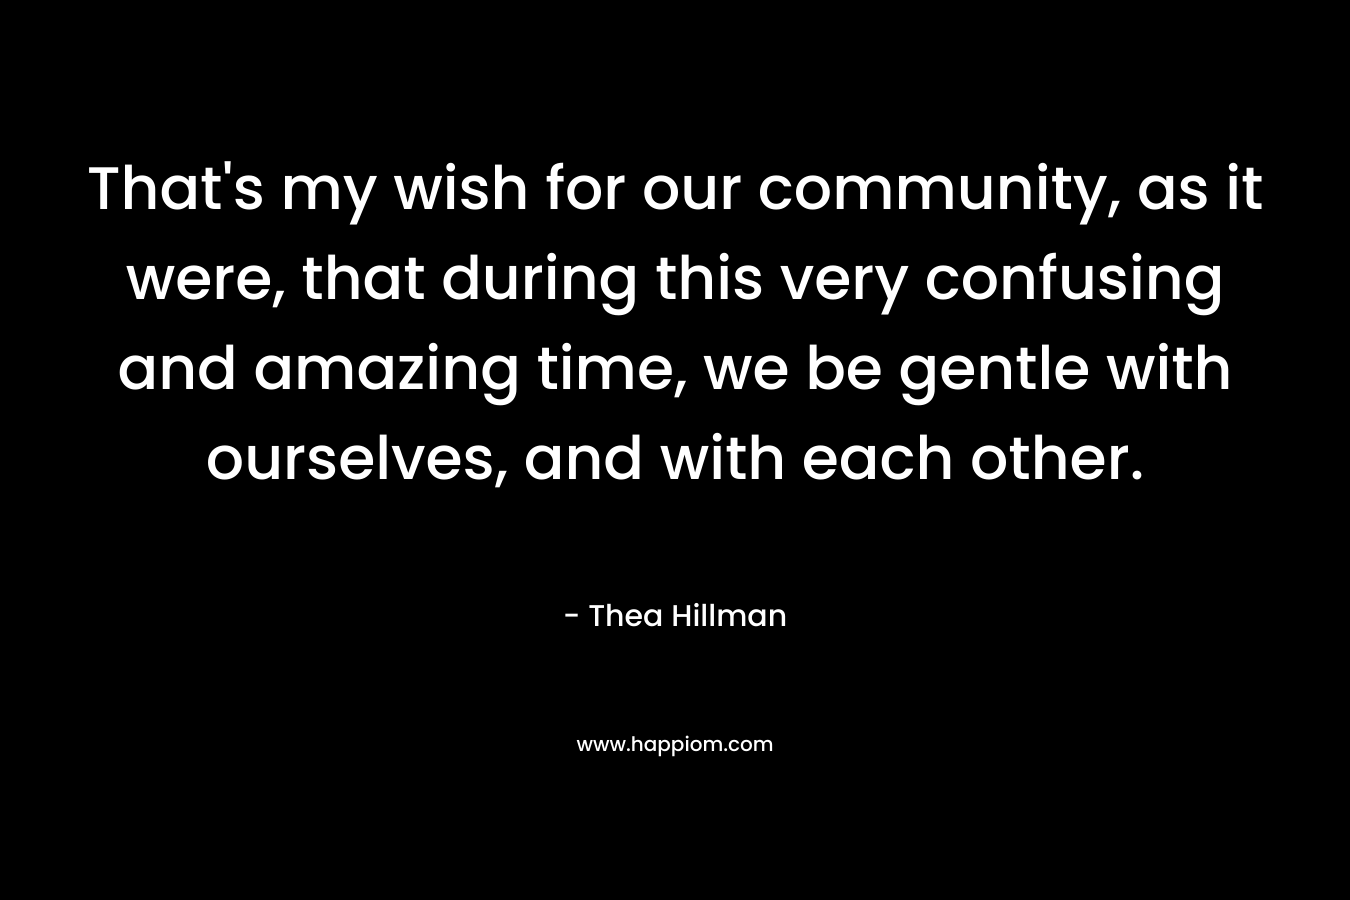 That's my wish for our community, as it were, that during this very confusing and amazing time, we be gentle with ourselves, and with each other.